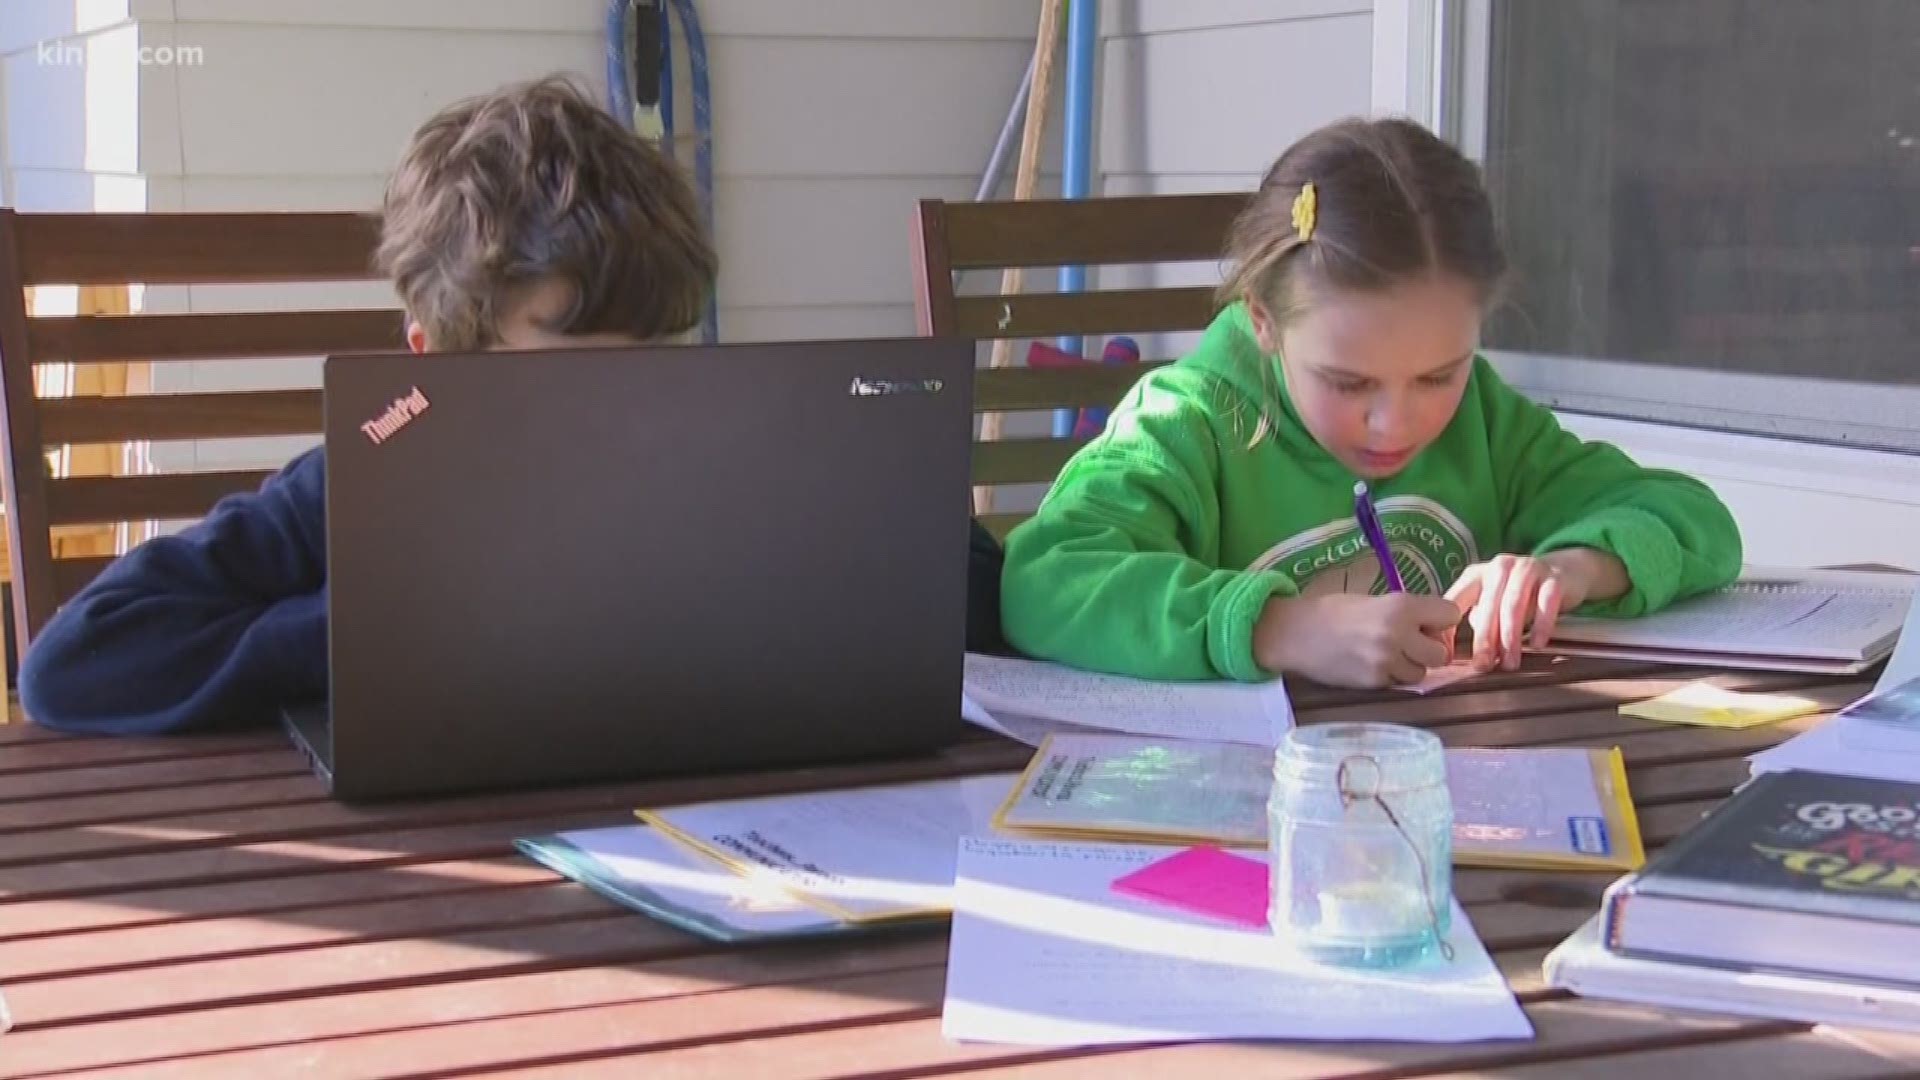 Washington districts started remote learning Monday, after schools were shut due to the coronavirus pandemic. Parents and educators both say it's not perfect.